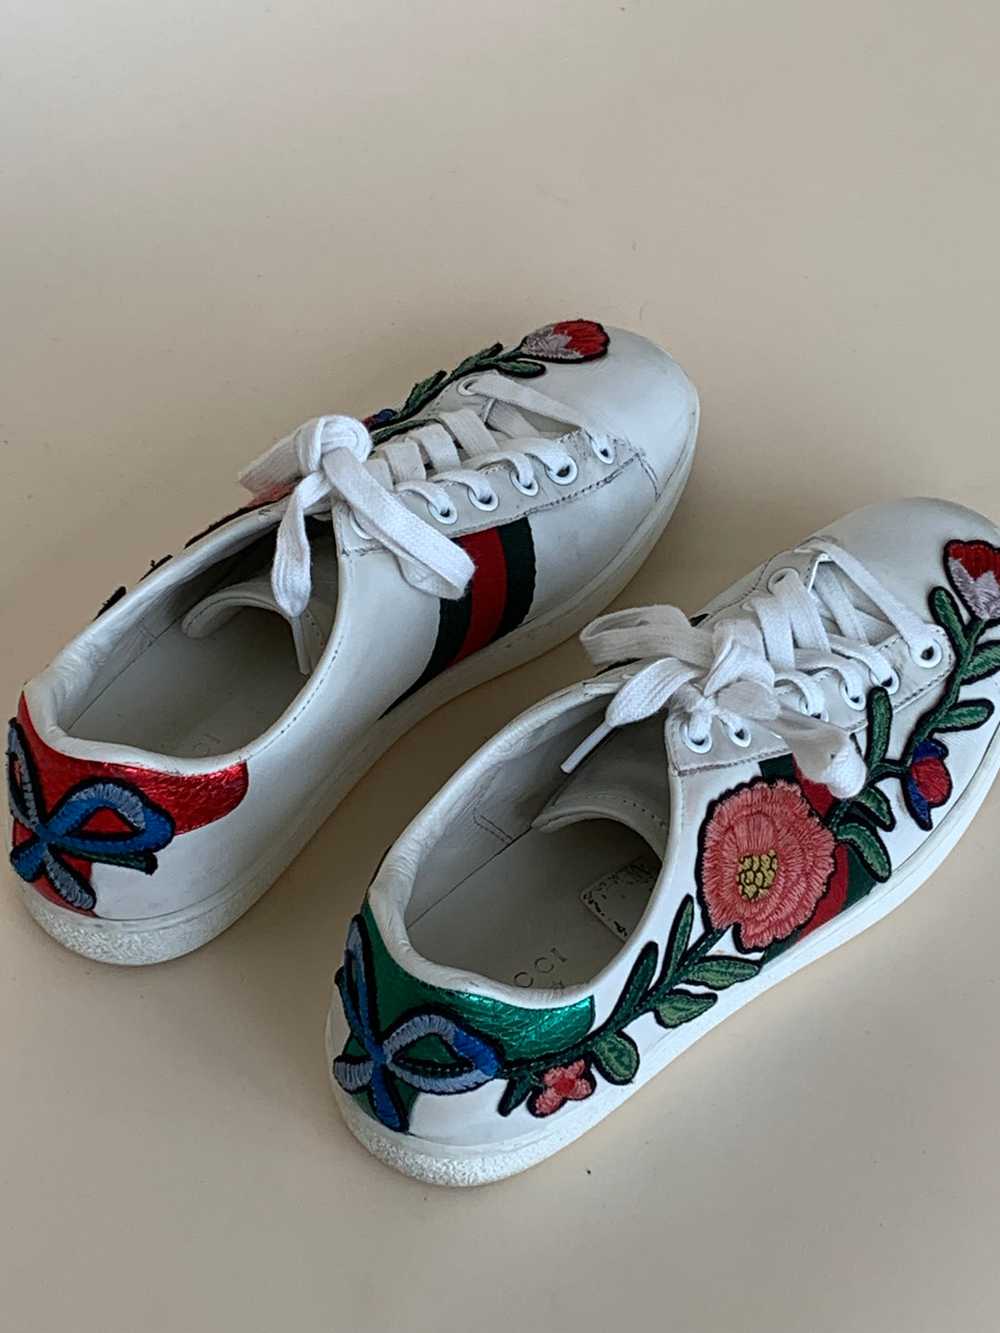 Gucci floral Ace sneaker - image 5